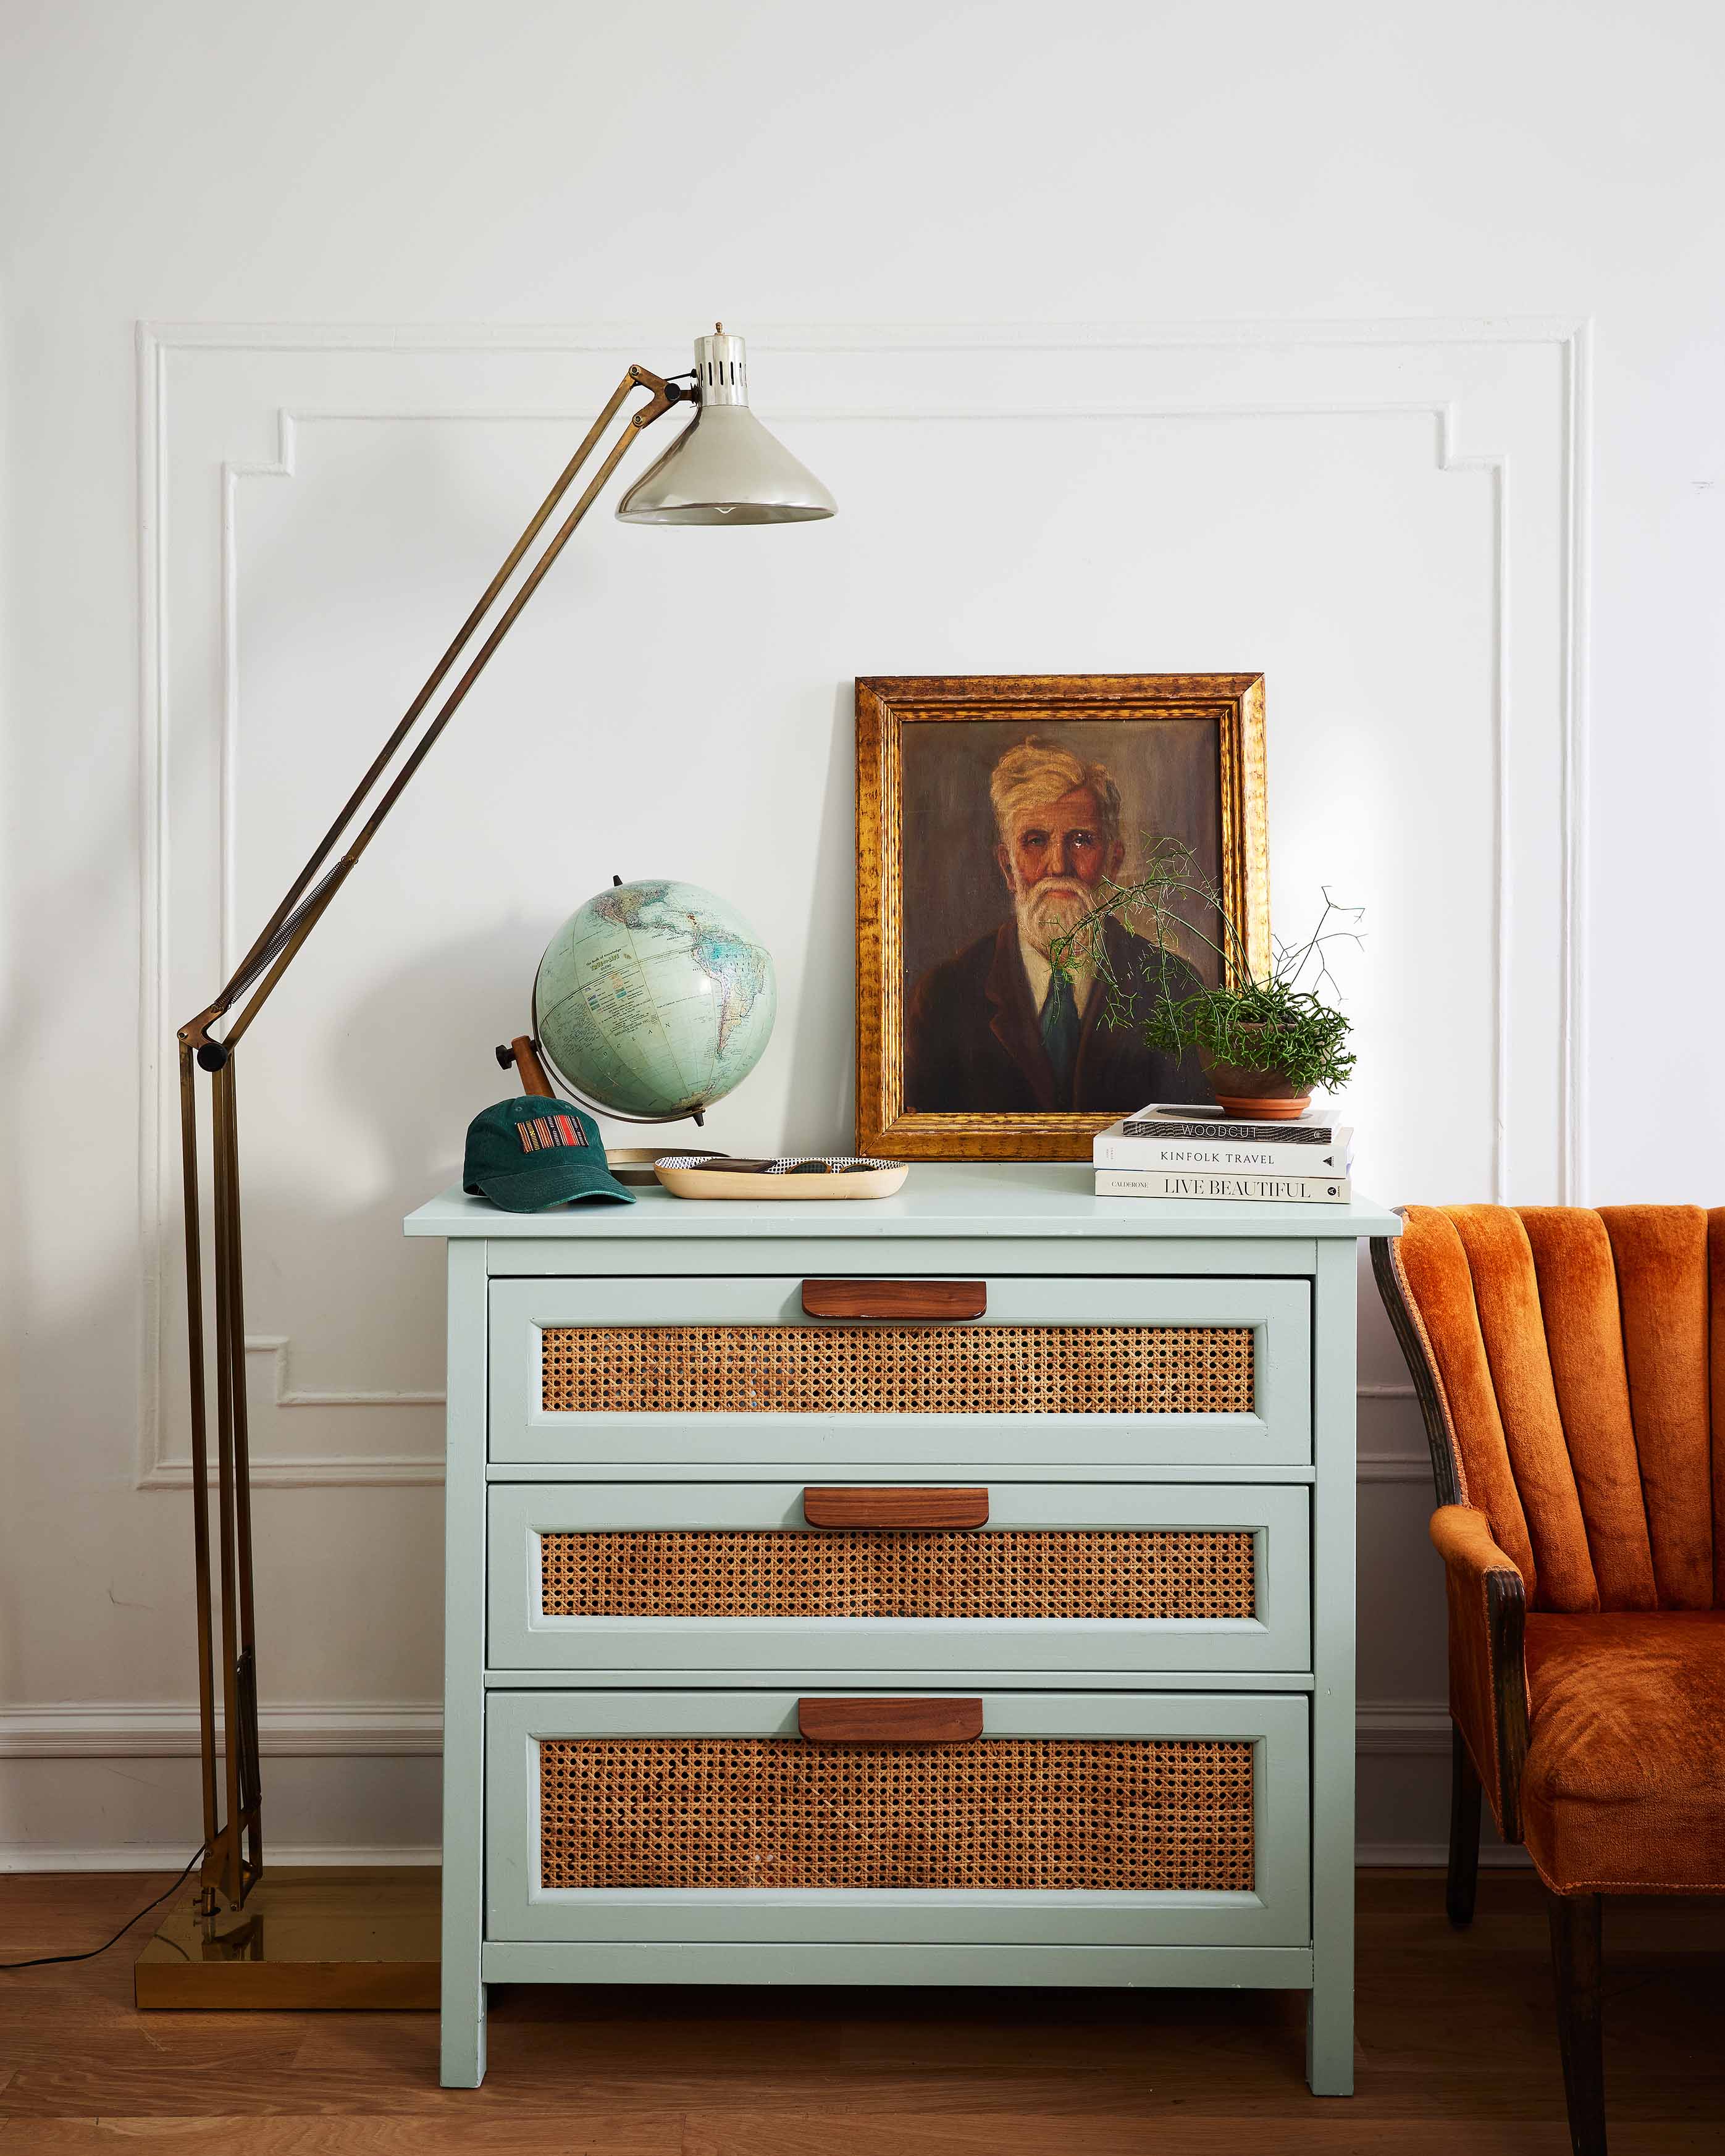 Painting a dresser and adding cane embellishments takes it to a whole other level.